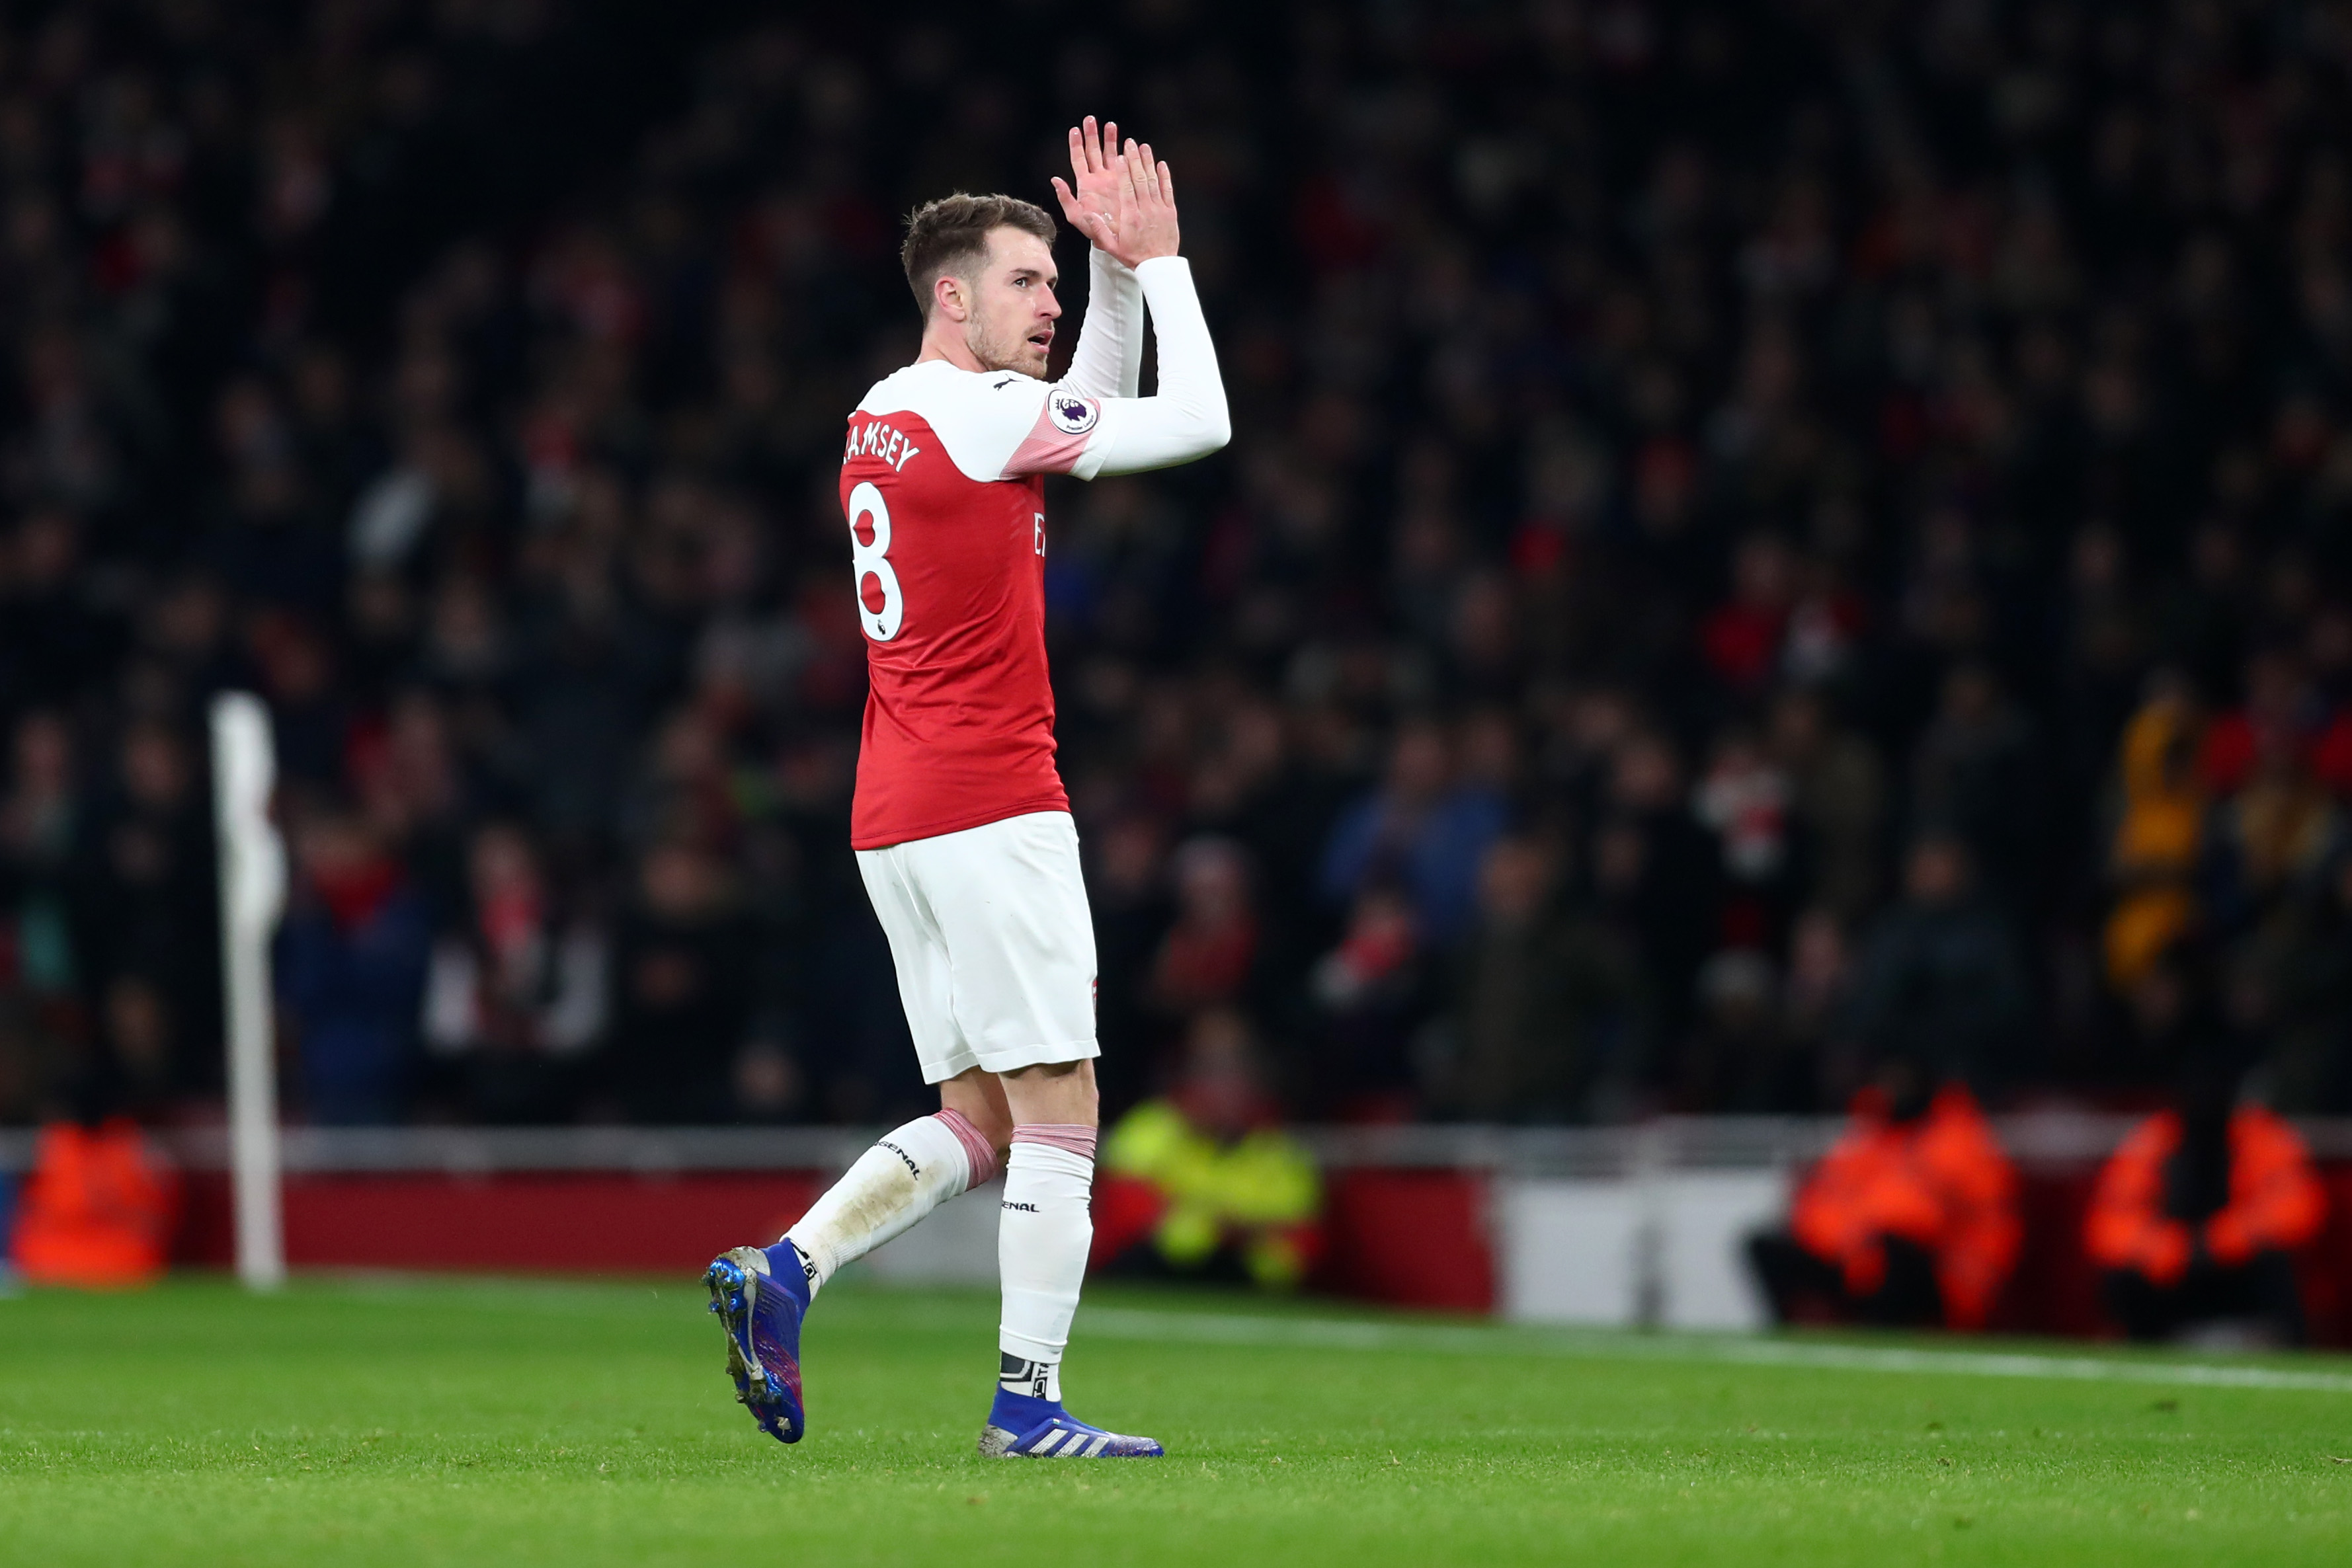 LONDON, ENGLAND - JANUARY 19:  Aaron Ramsey of Arsenal acknowledges the fans as he is substituted during the Premier League match between Arsenal FC and Chelsea FC at Emirates Stadium on January 19, 2019 in London, United Kingdom.  (Photo by Clive Rose/Getty Images)